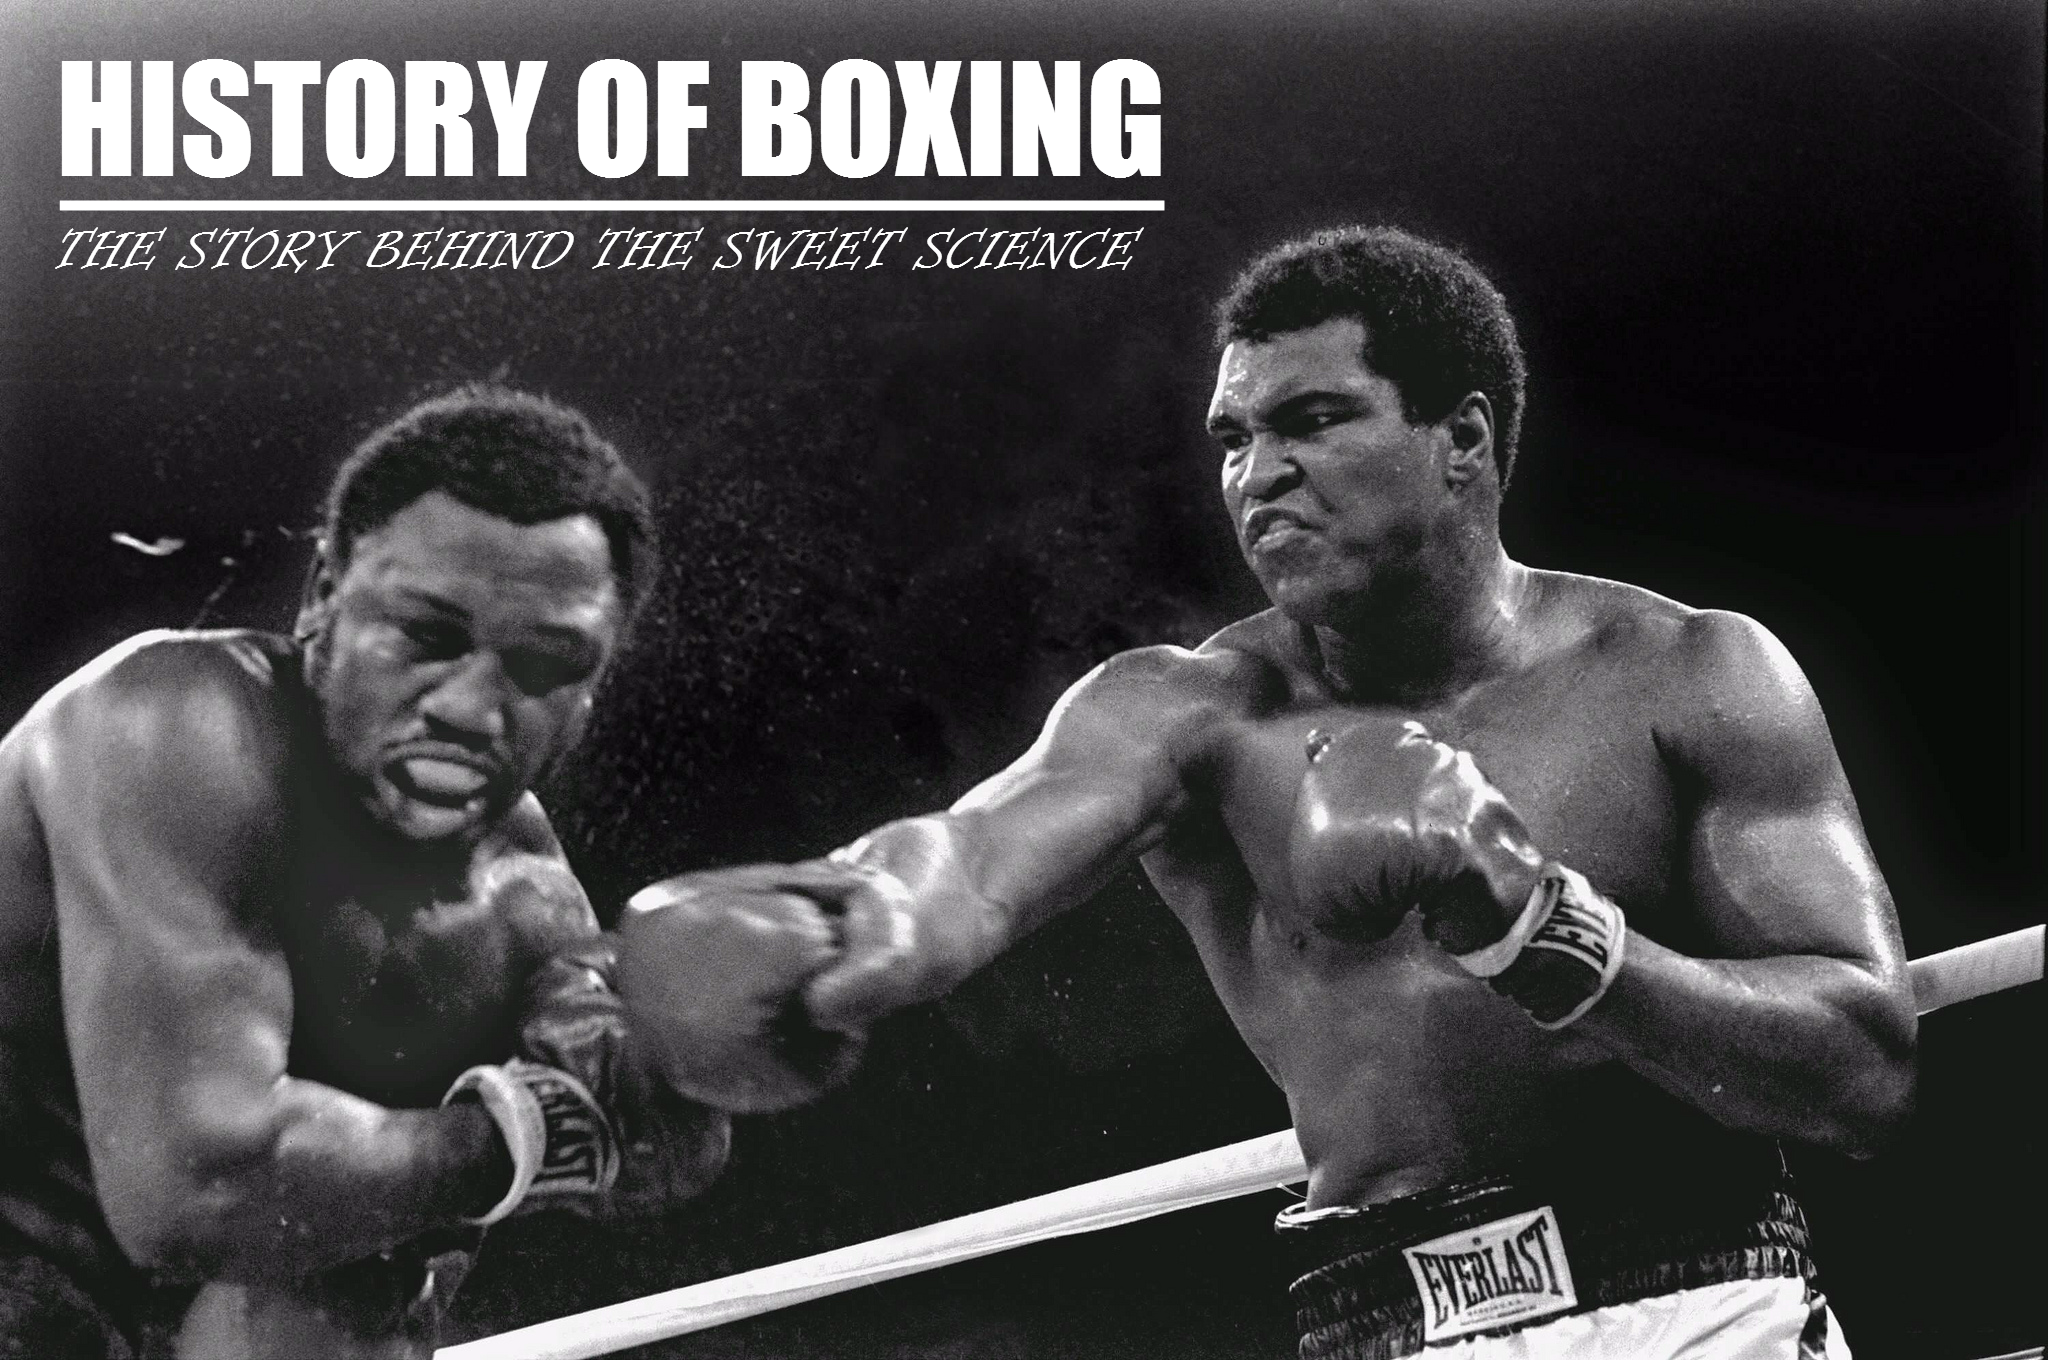 The History of Boxing